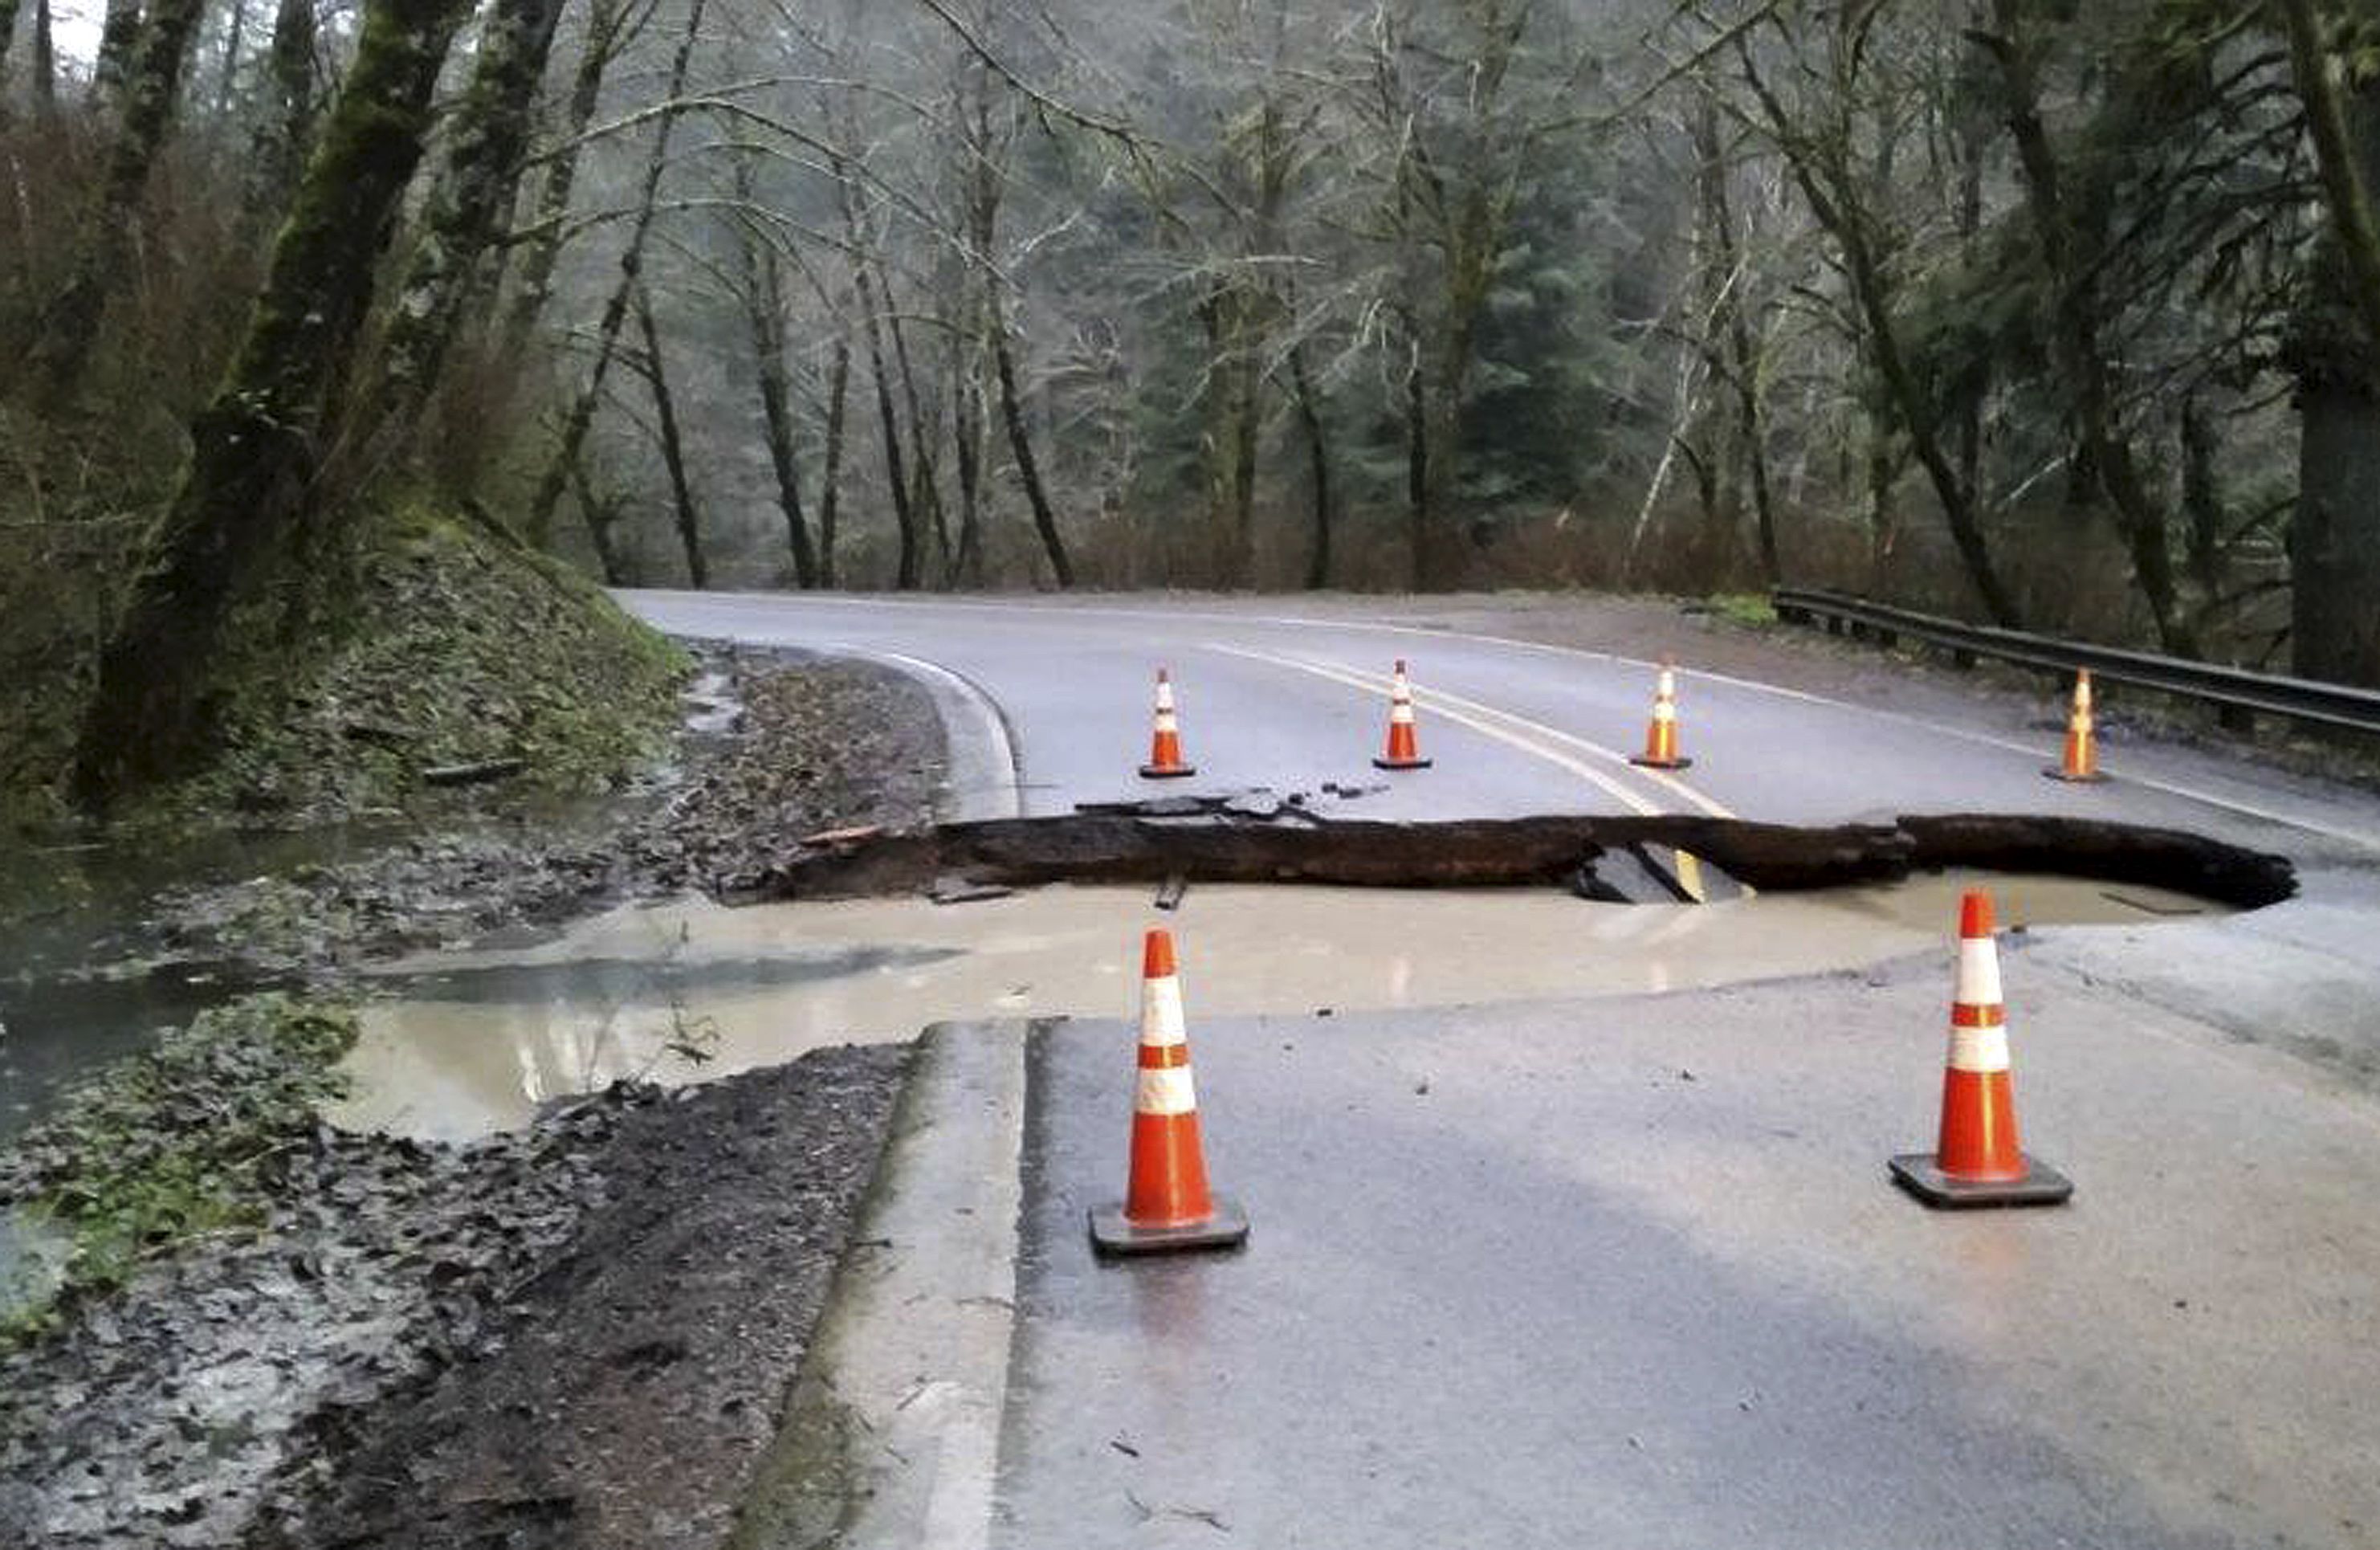 Sinkhole on Highway 22 in Yamhill County, Ore., Tuesday, Dec. 8, 2015.